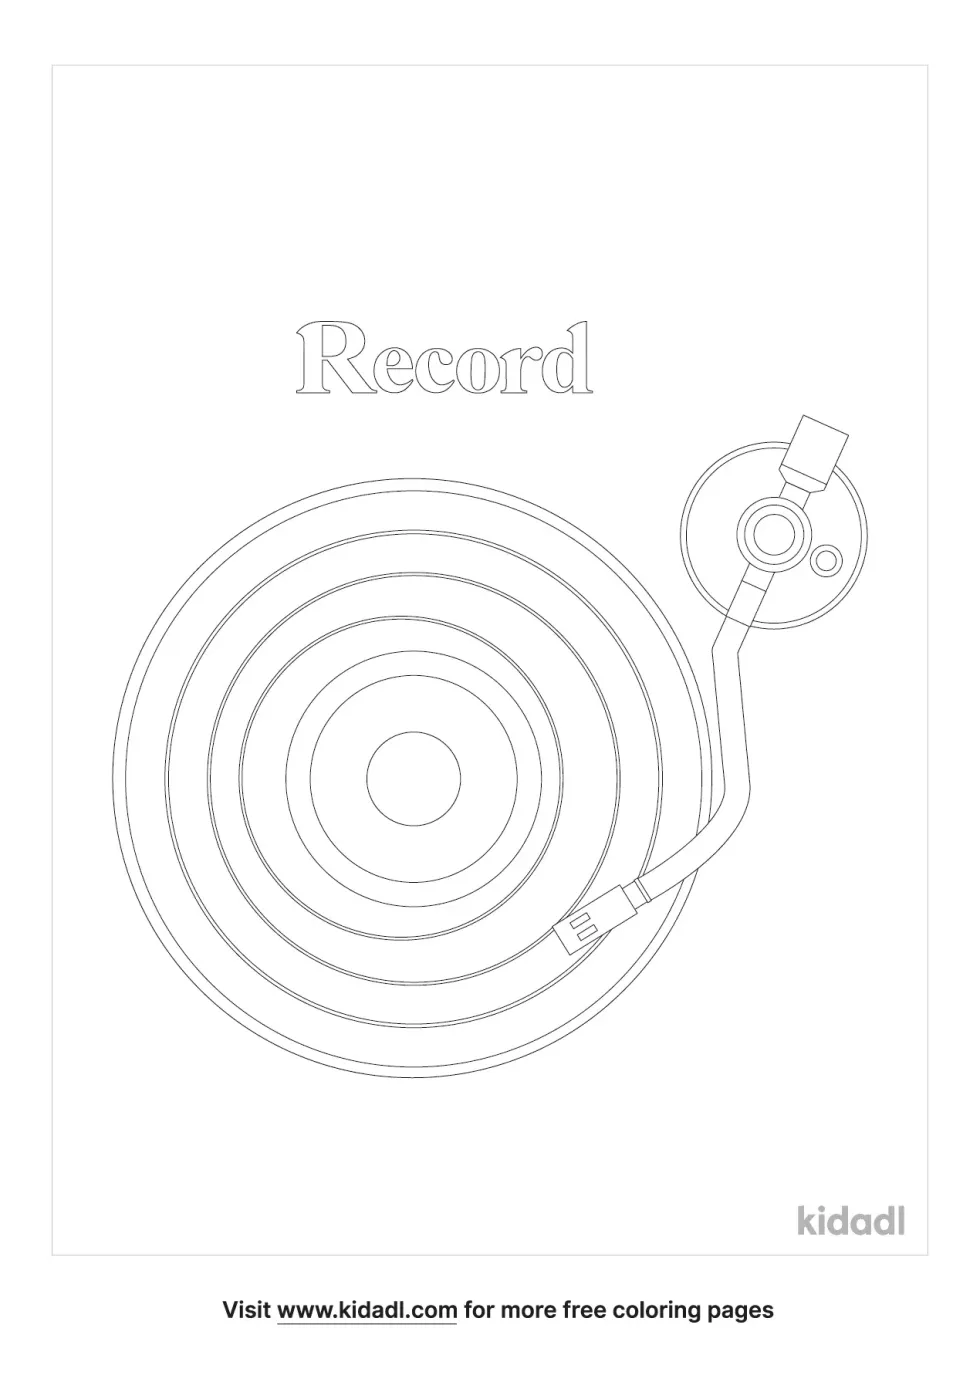 Record Coloring Page